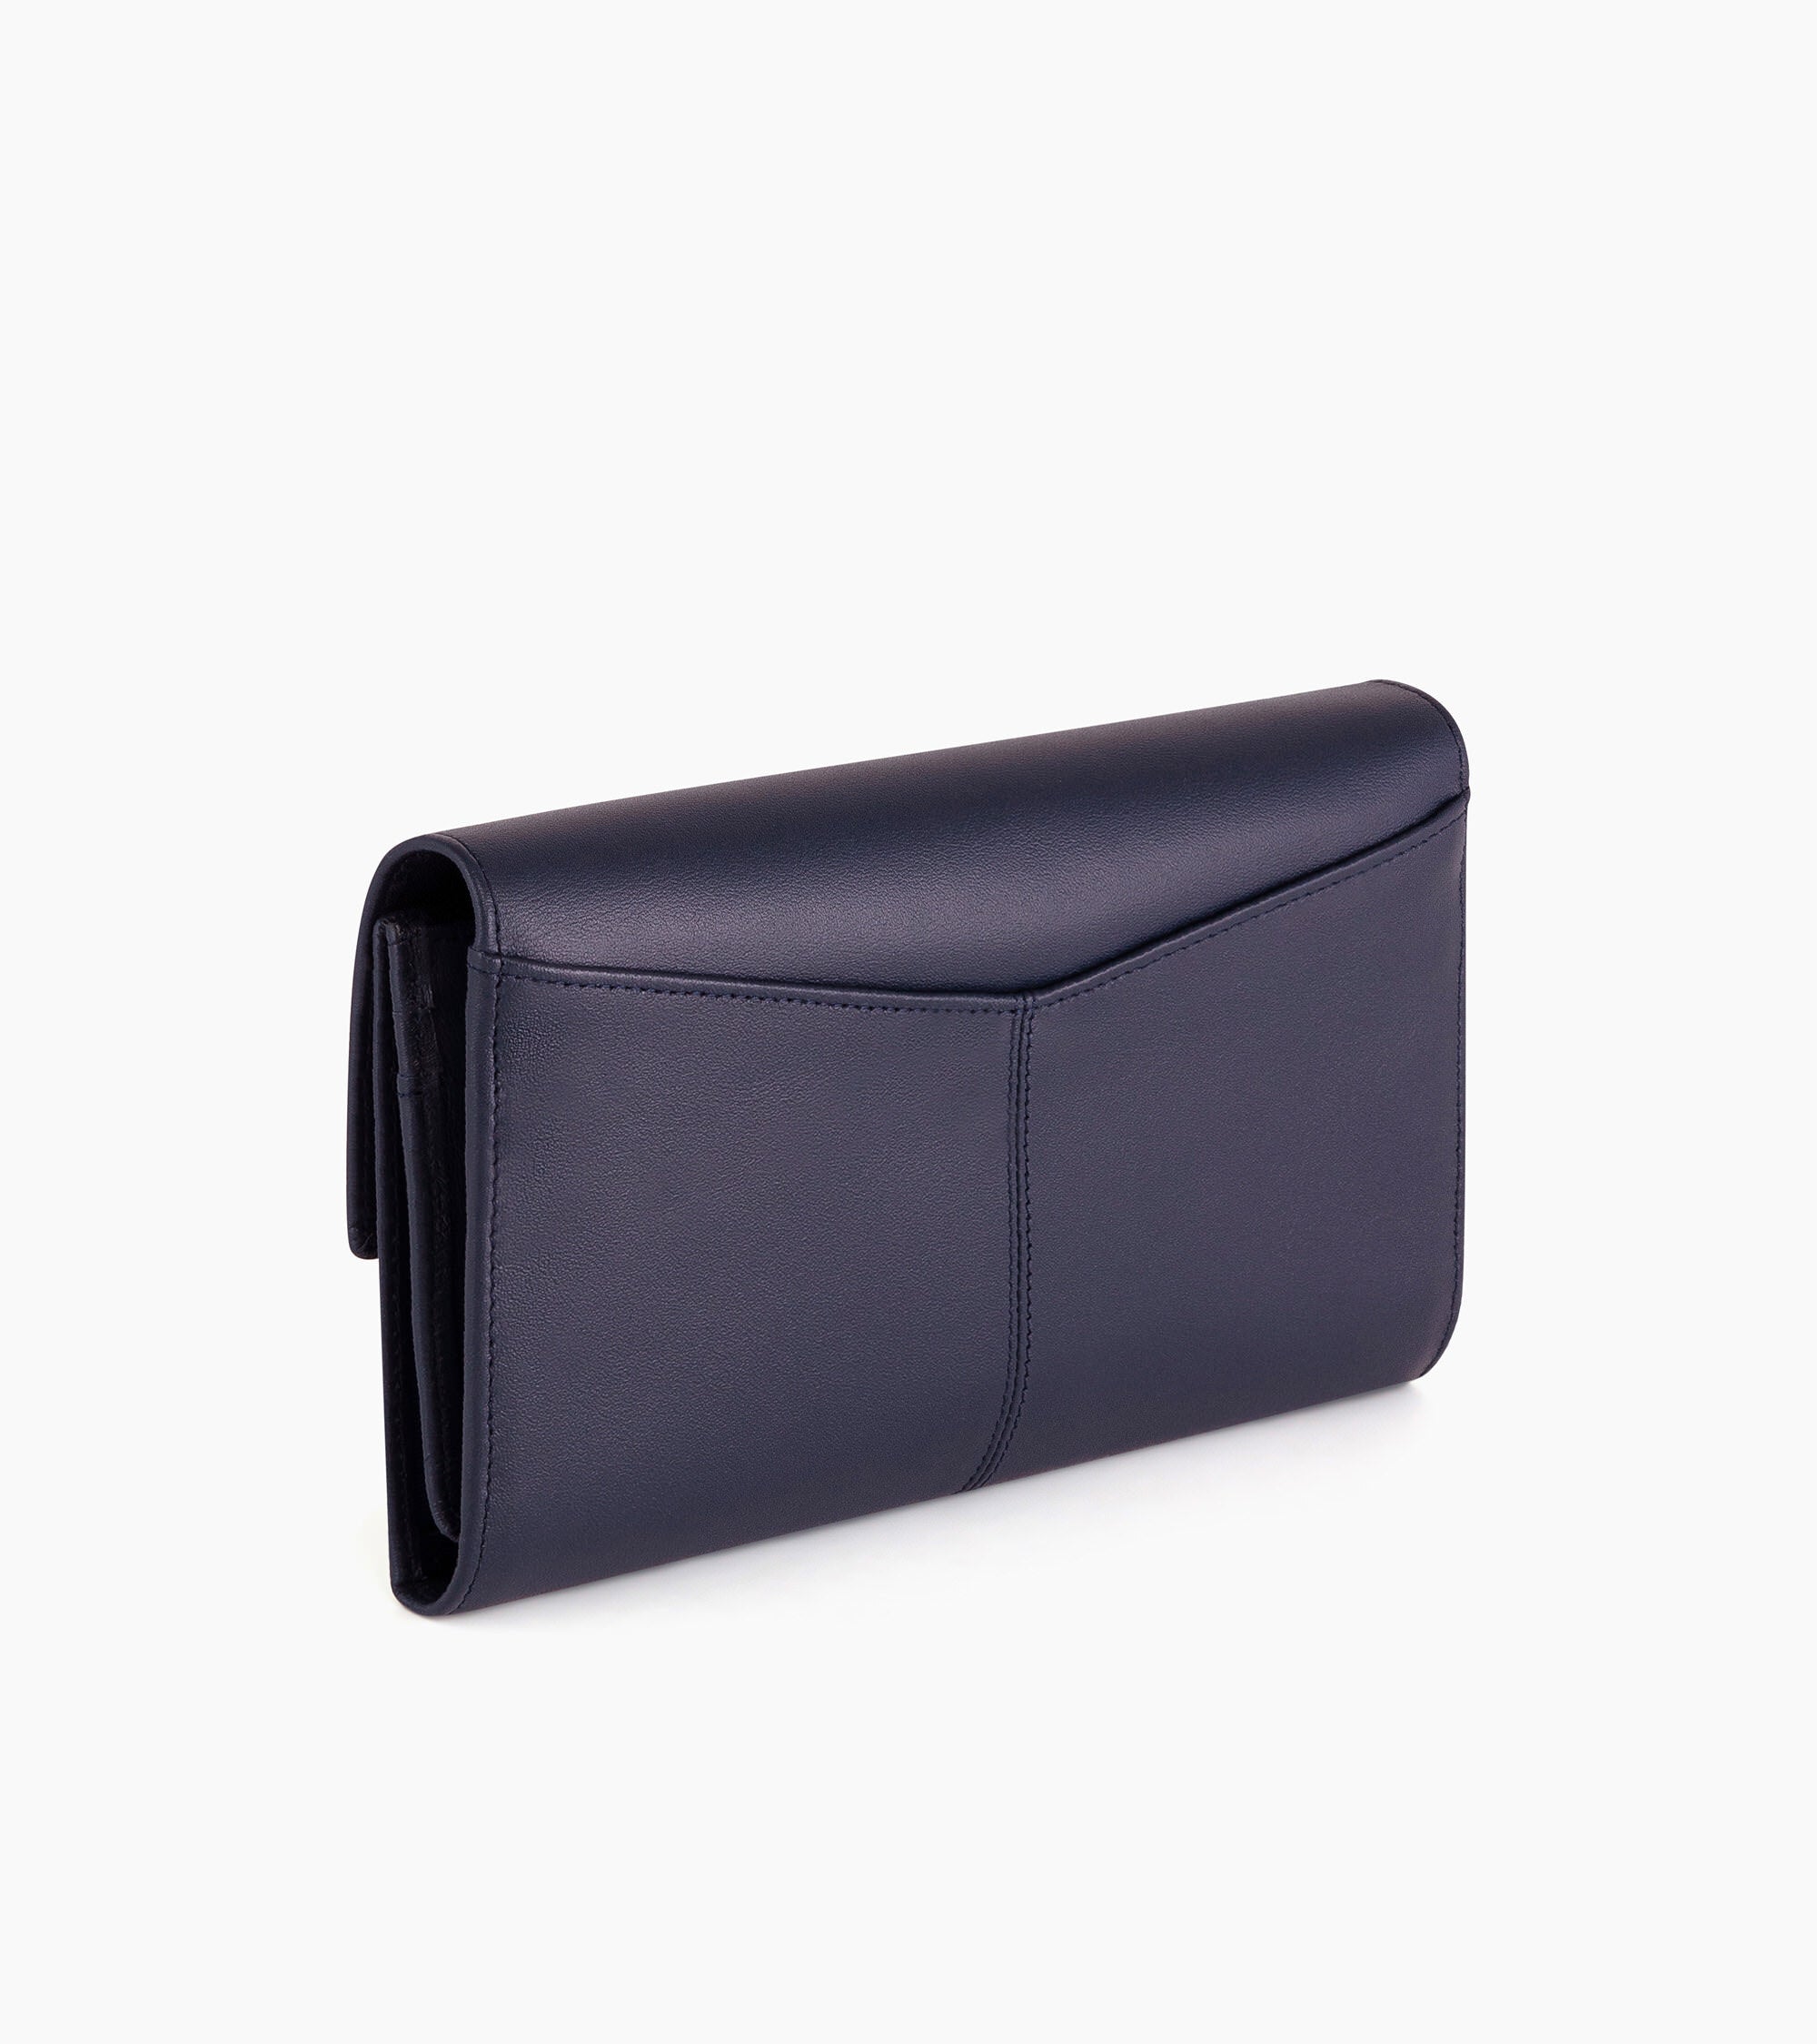 Charlotte flap organizer wallet in smooth leather